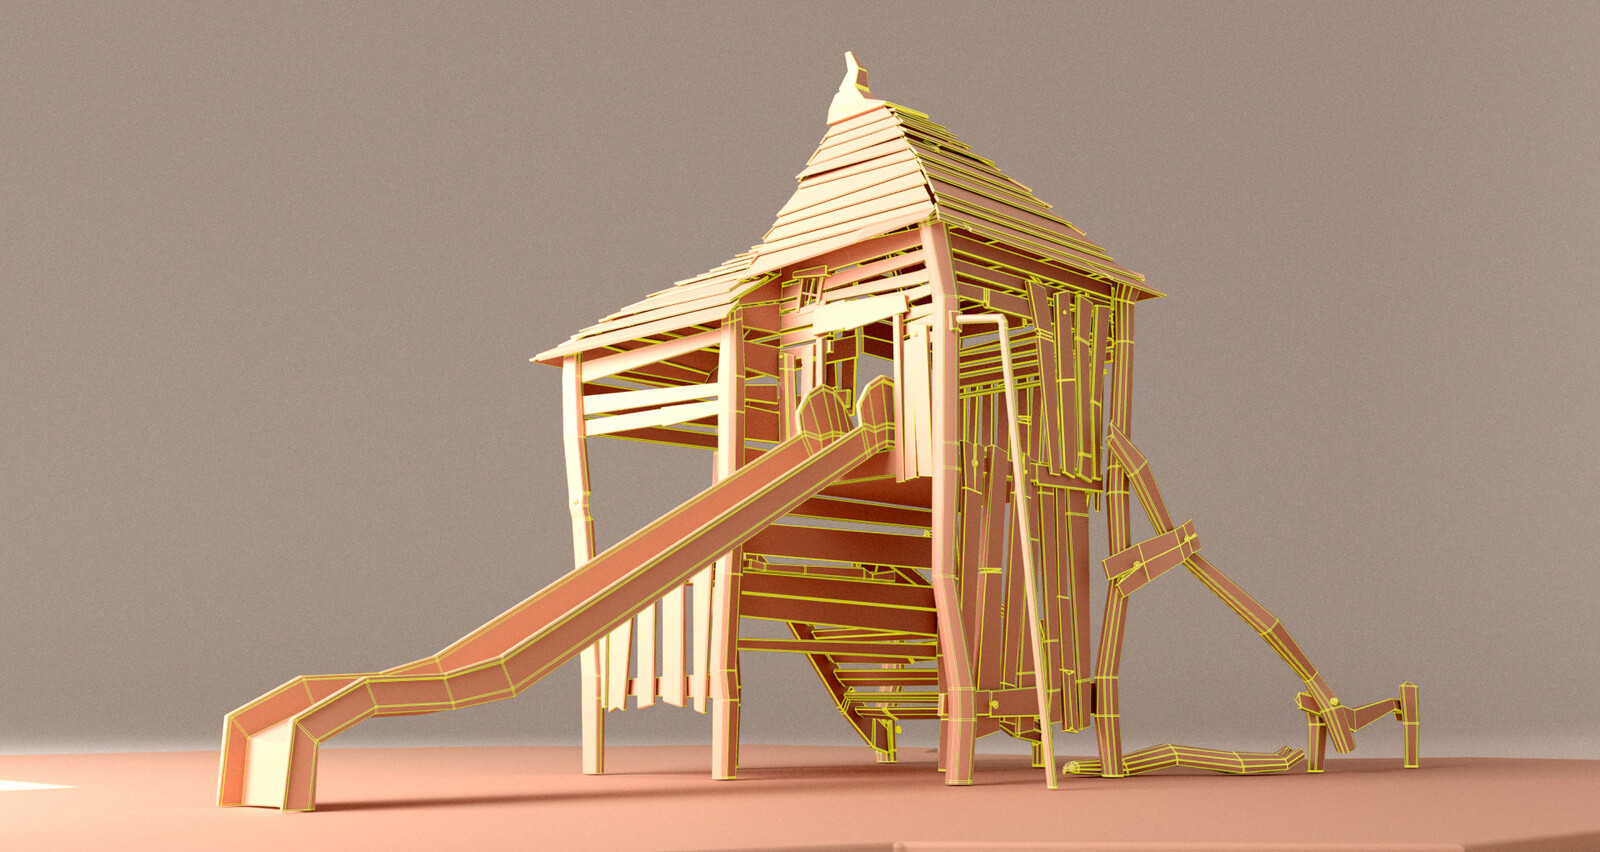 3D model, close-up, main building, back view, with wireframe